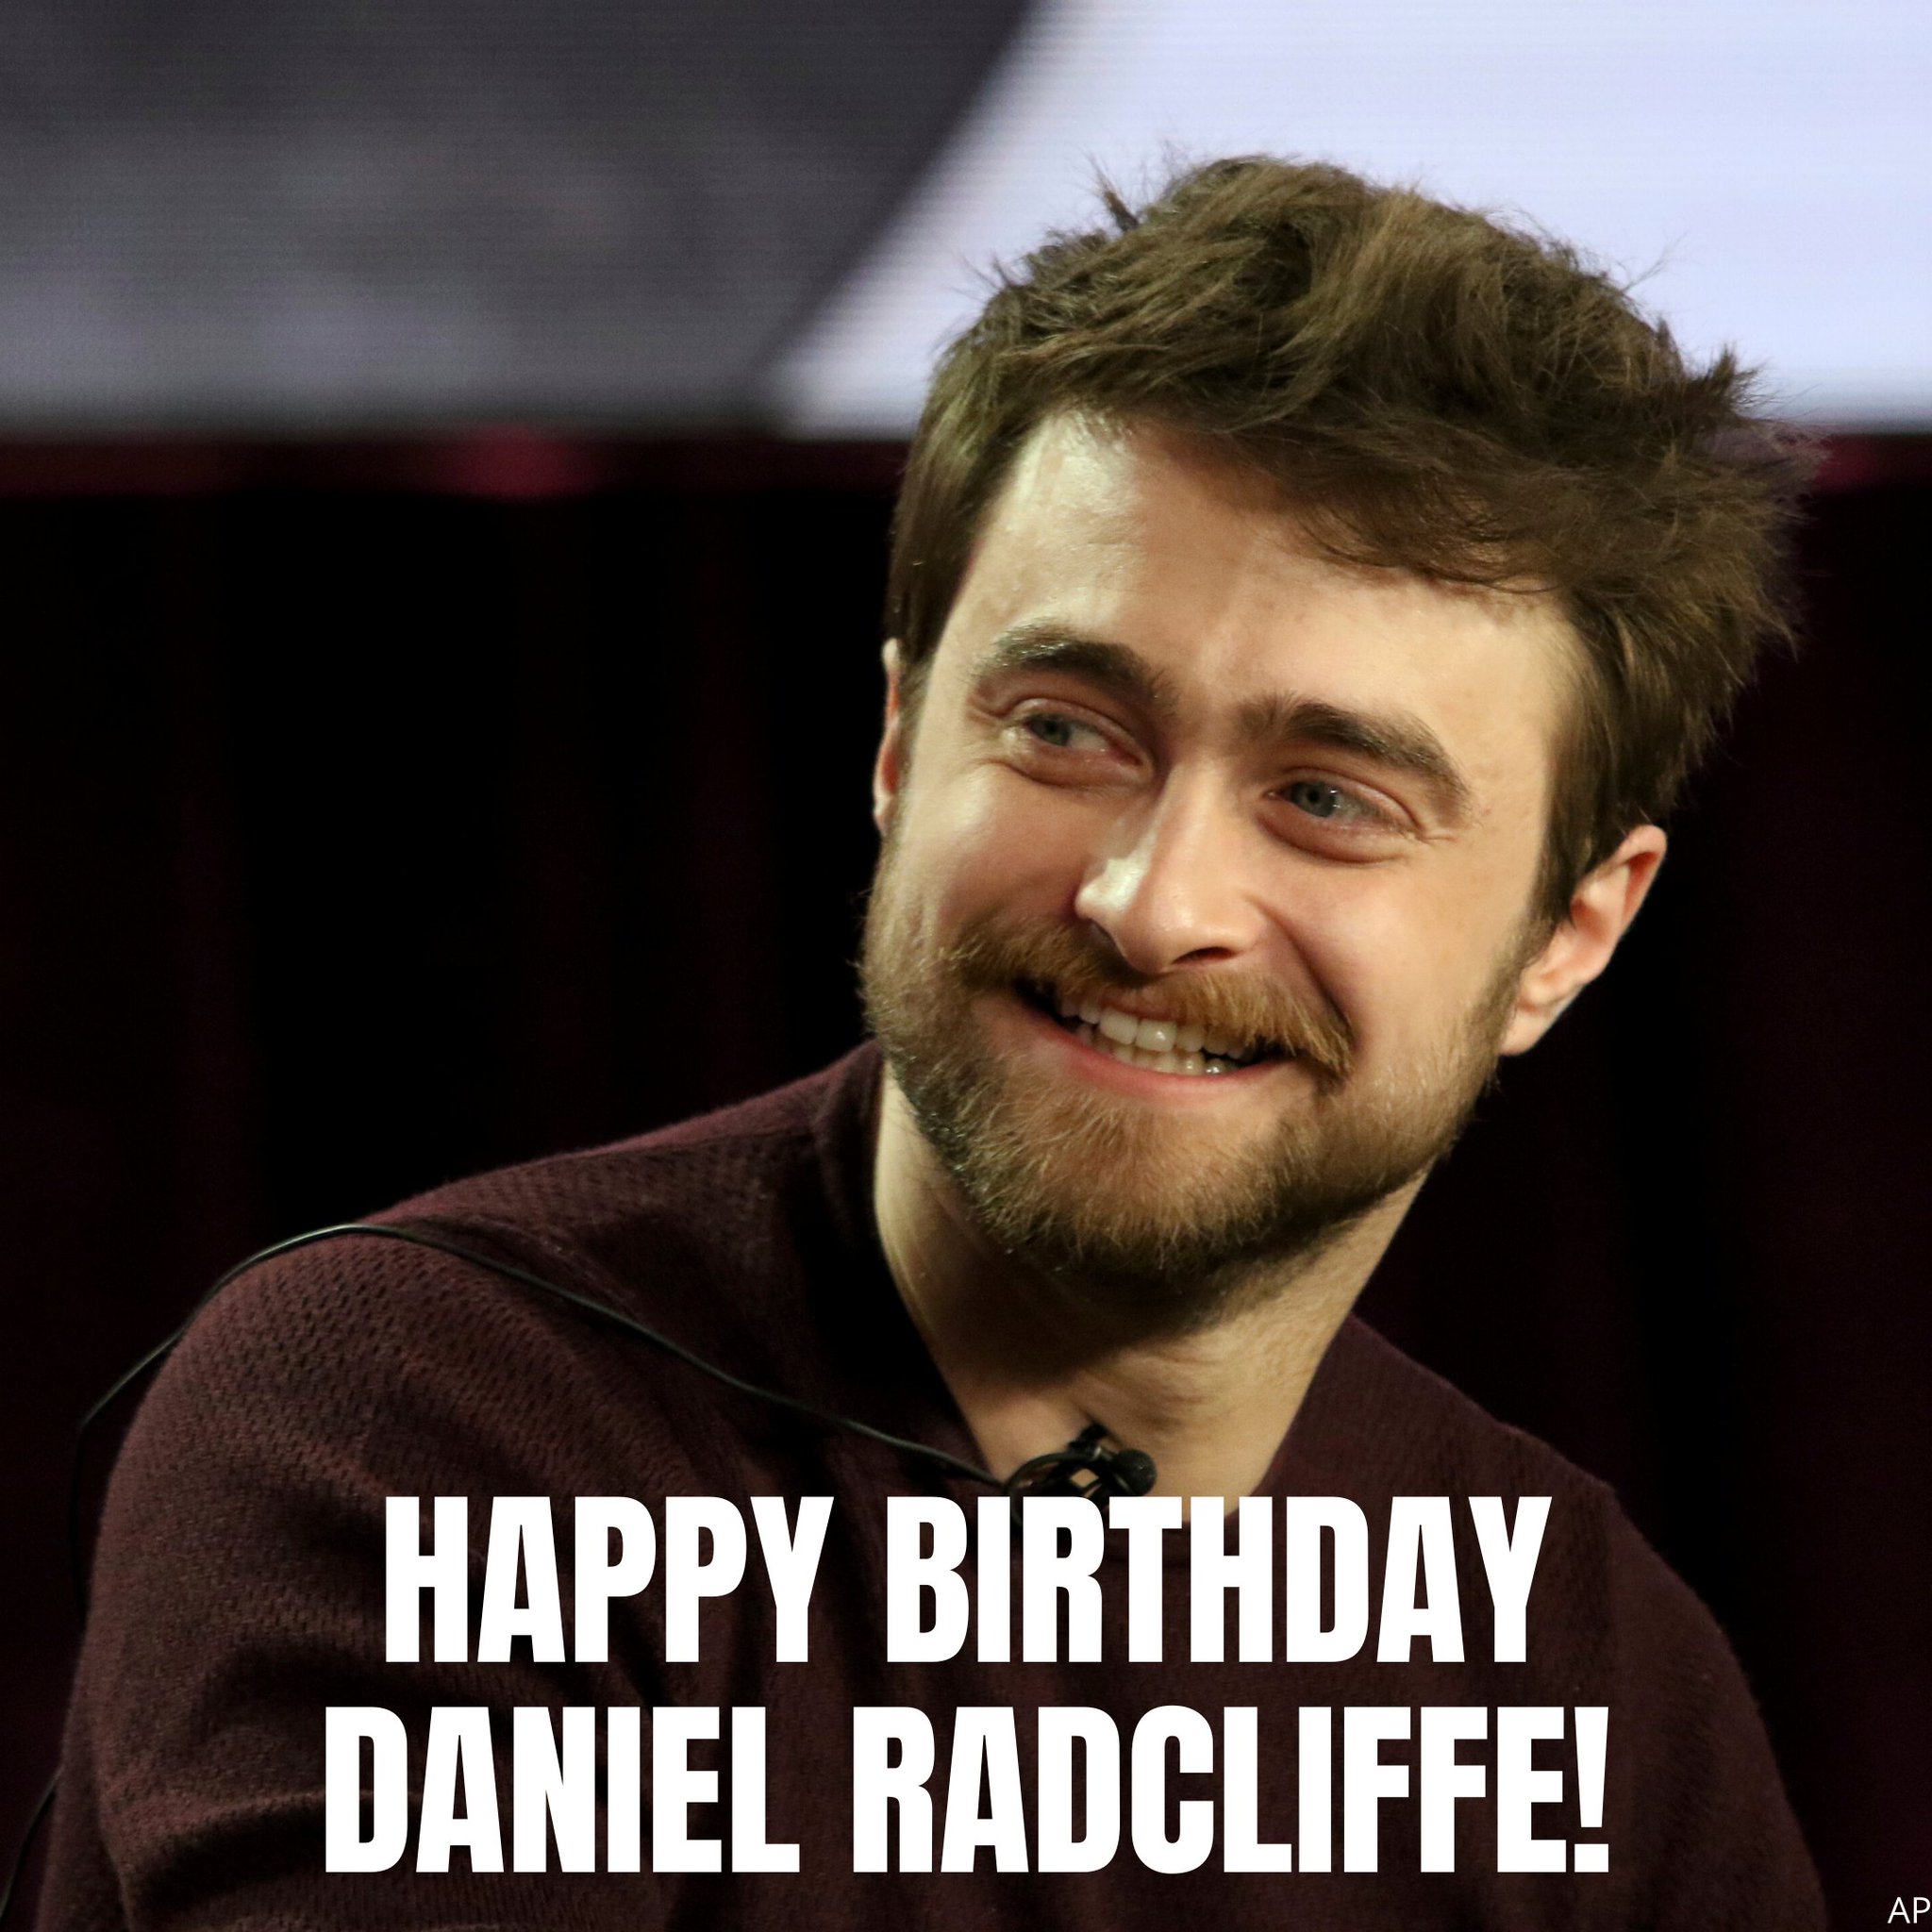 Happy Birthday, Daniel Radcliff! What your favorite movie of his? (Bonus points if it\s a Harry Potter film) 